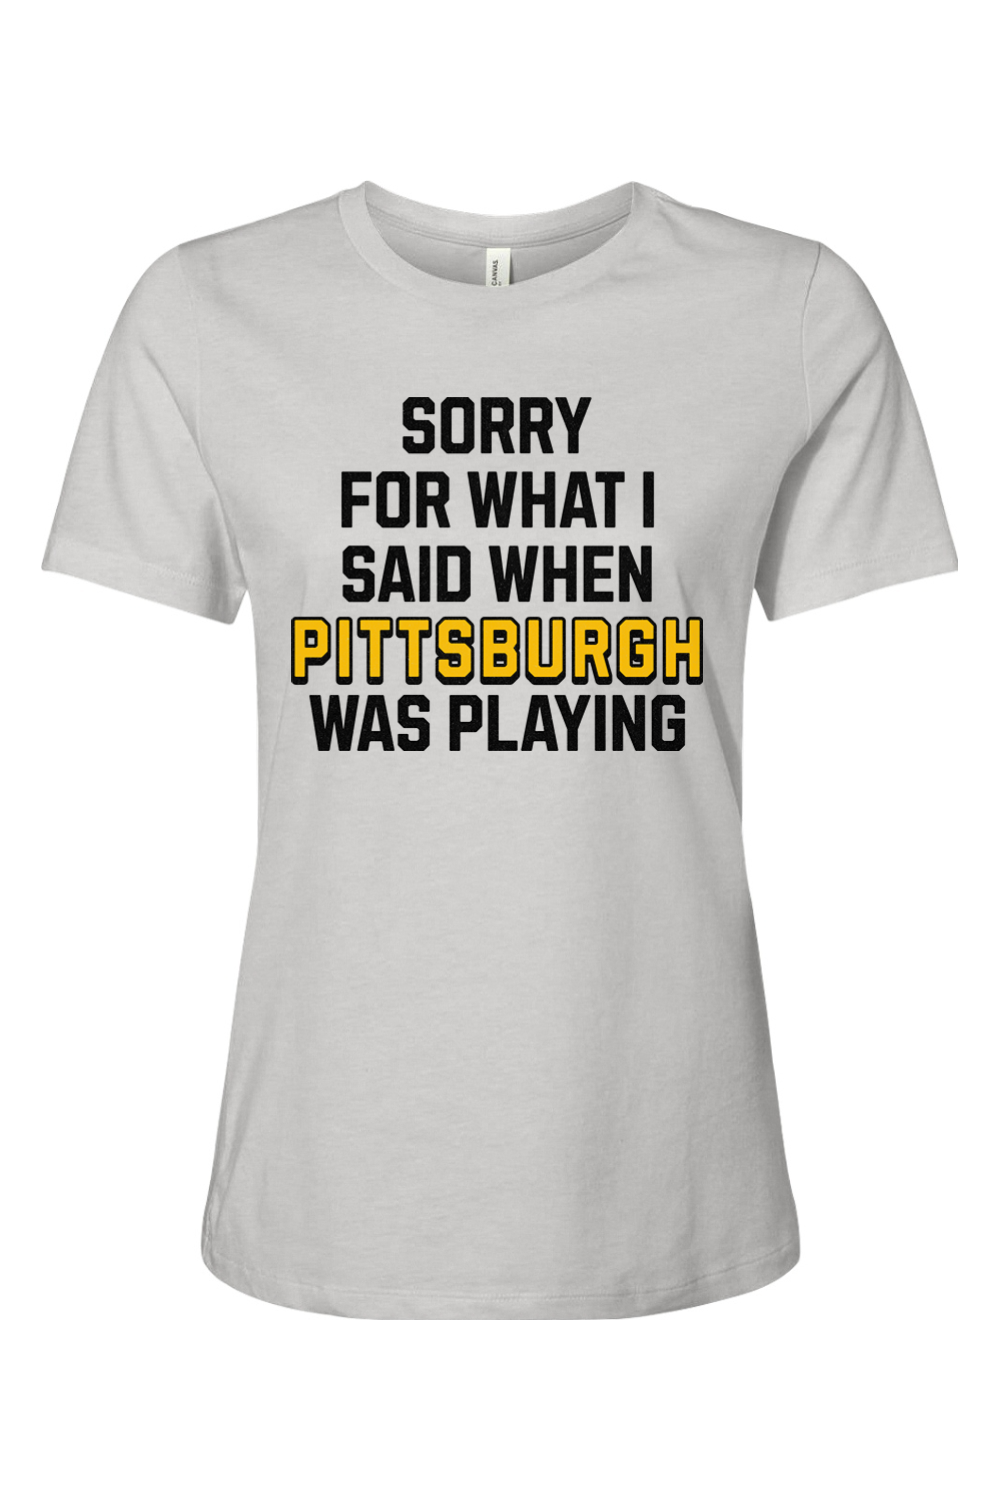 Sorry for What I Said When Pittsburgh Was Playing - Ladies Tee - Yinzylvania